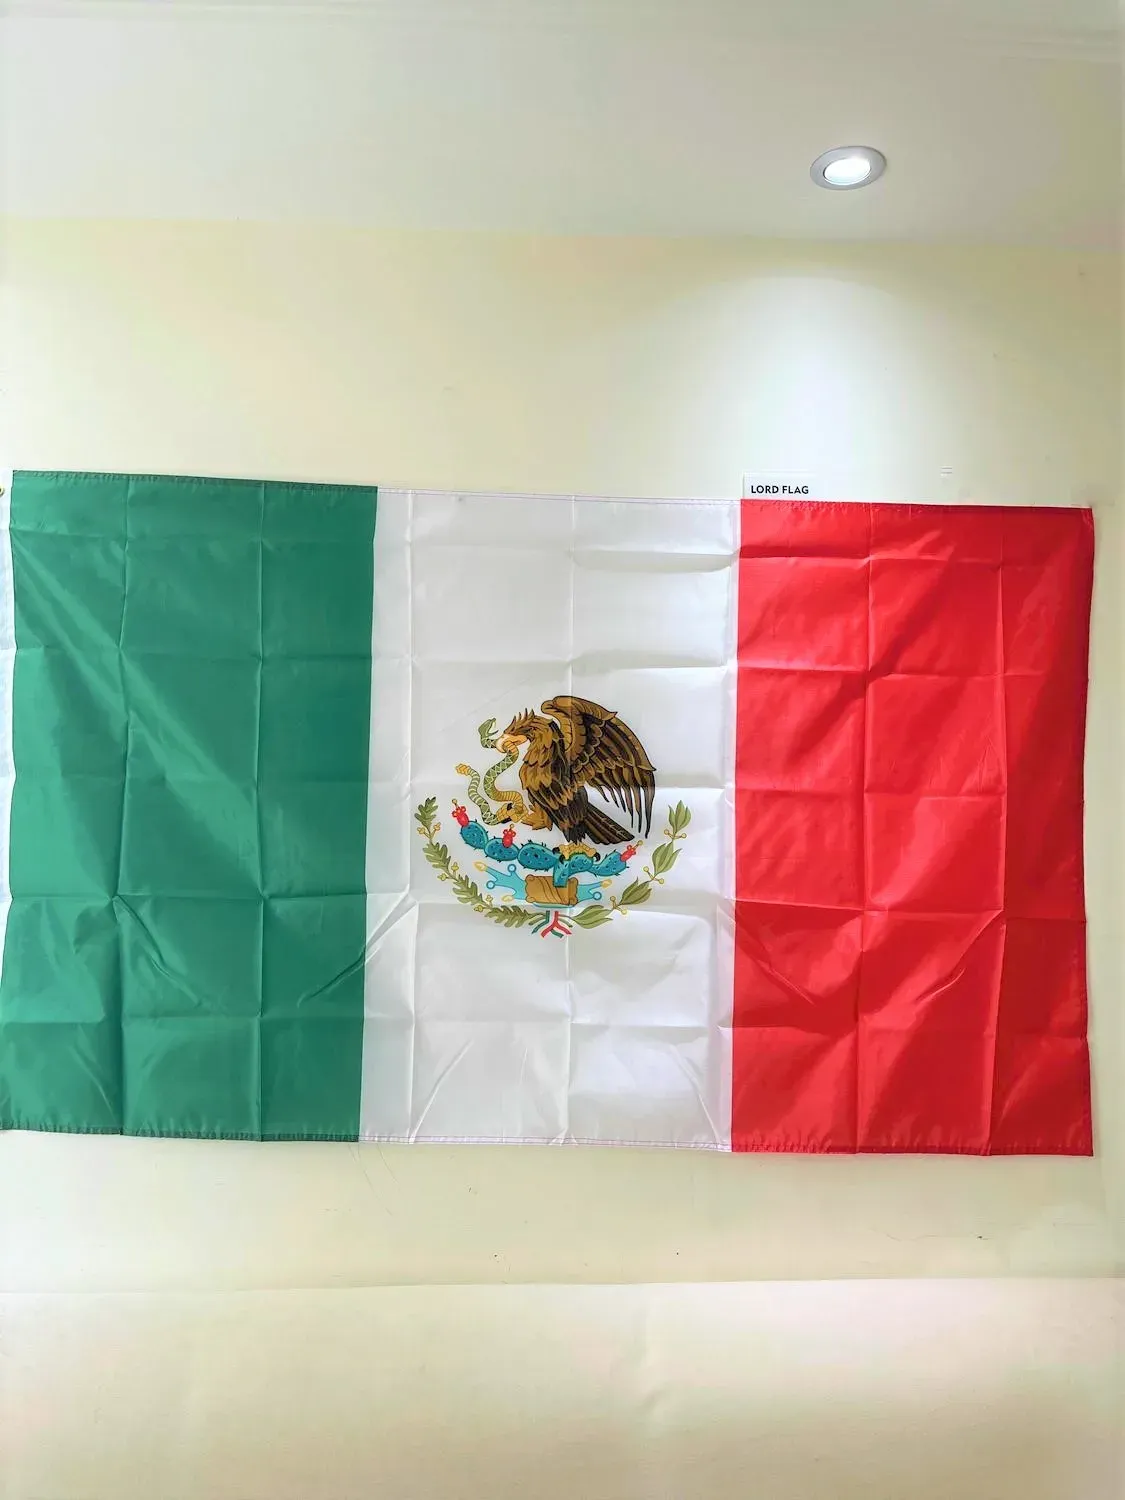 Flags Free shipping Mexico flag 90X150cm Hanging Printed red white green Mex Mx Mexican National Flags Mexicanos Banner For Decoration